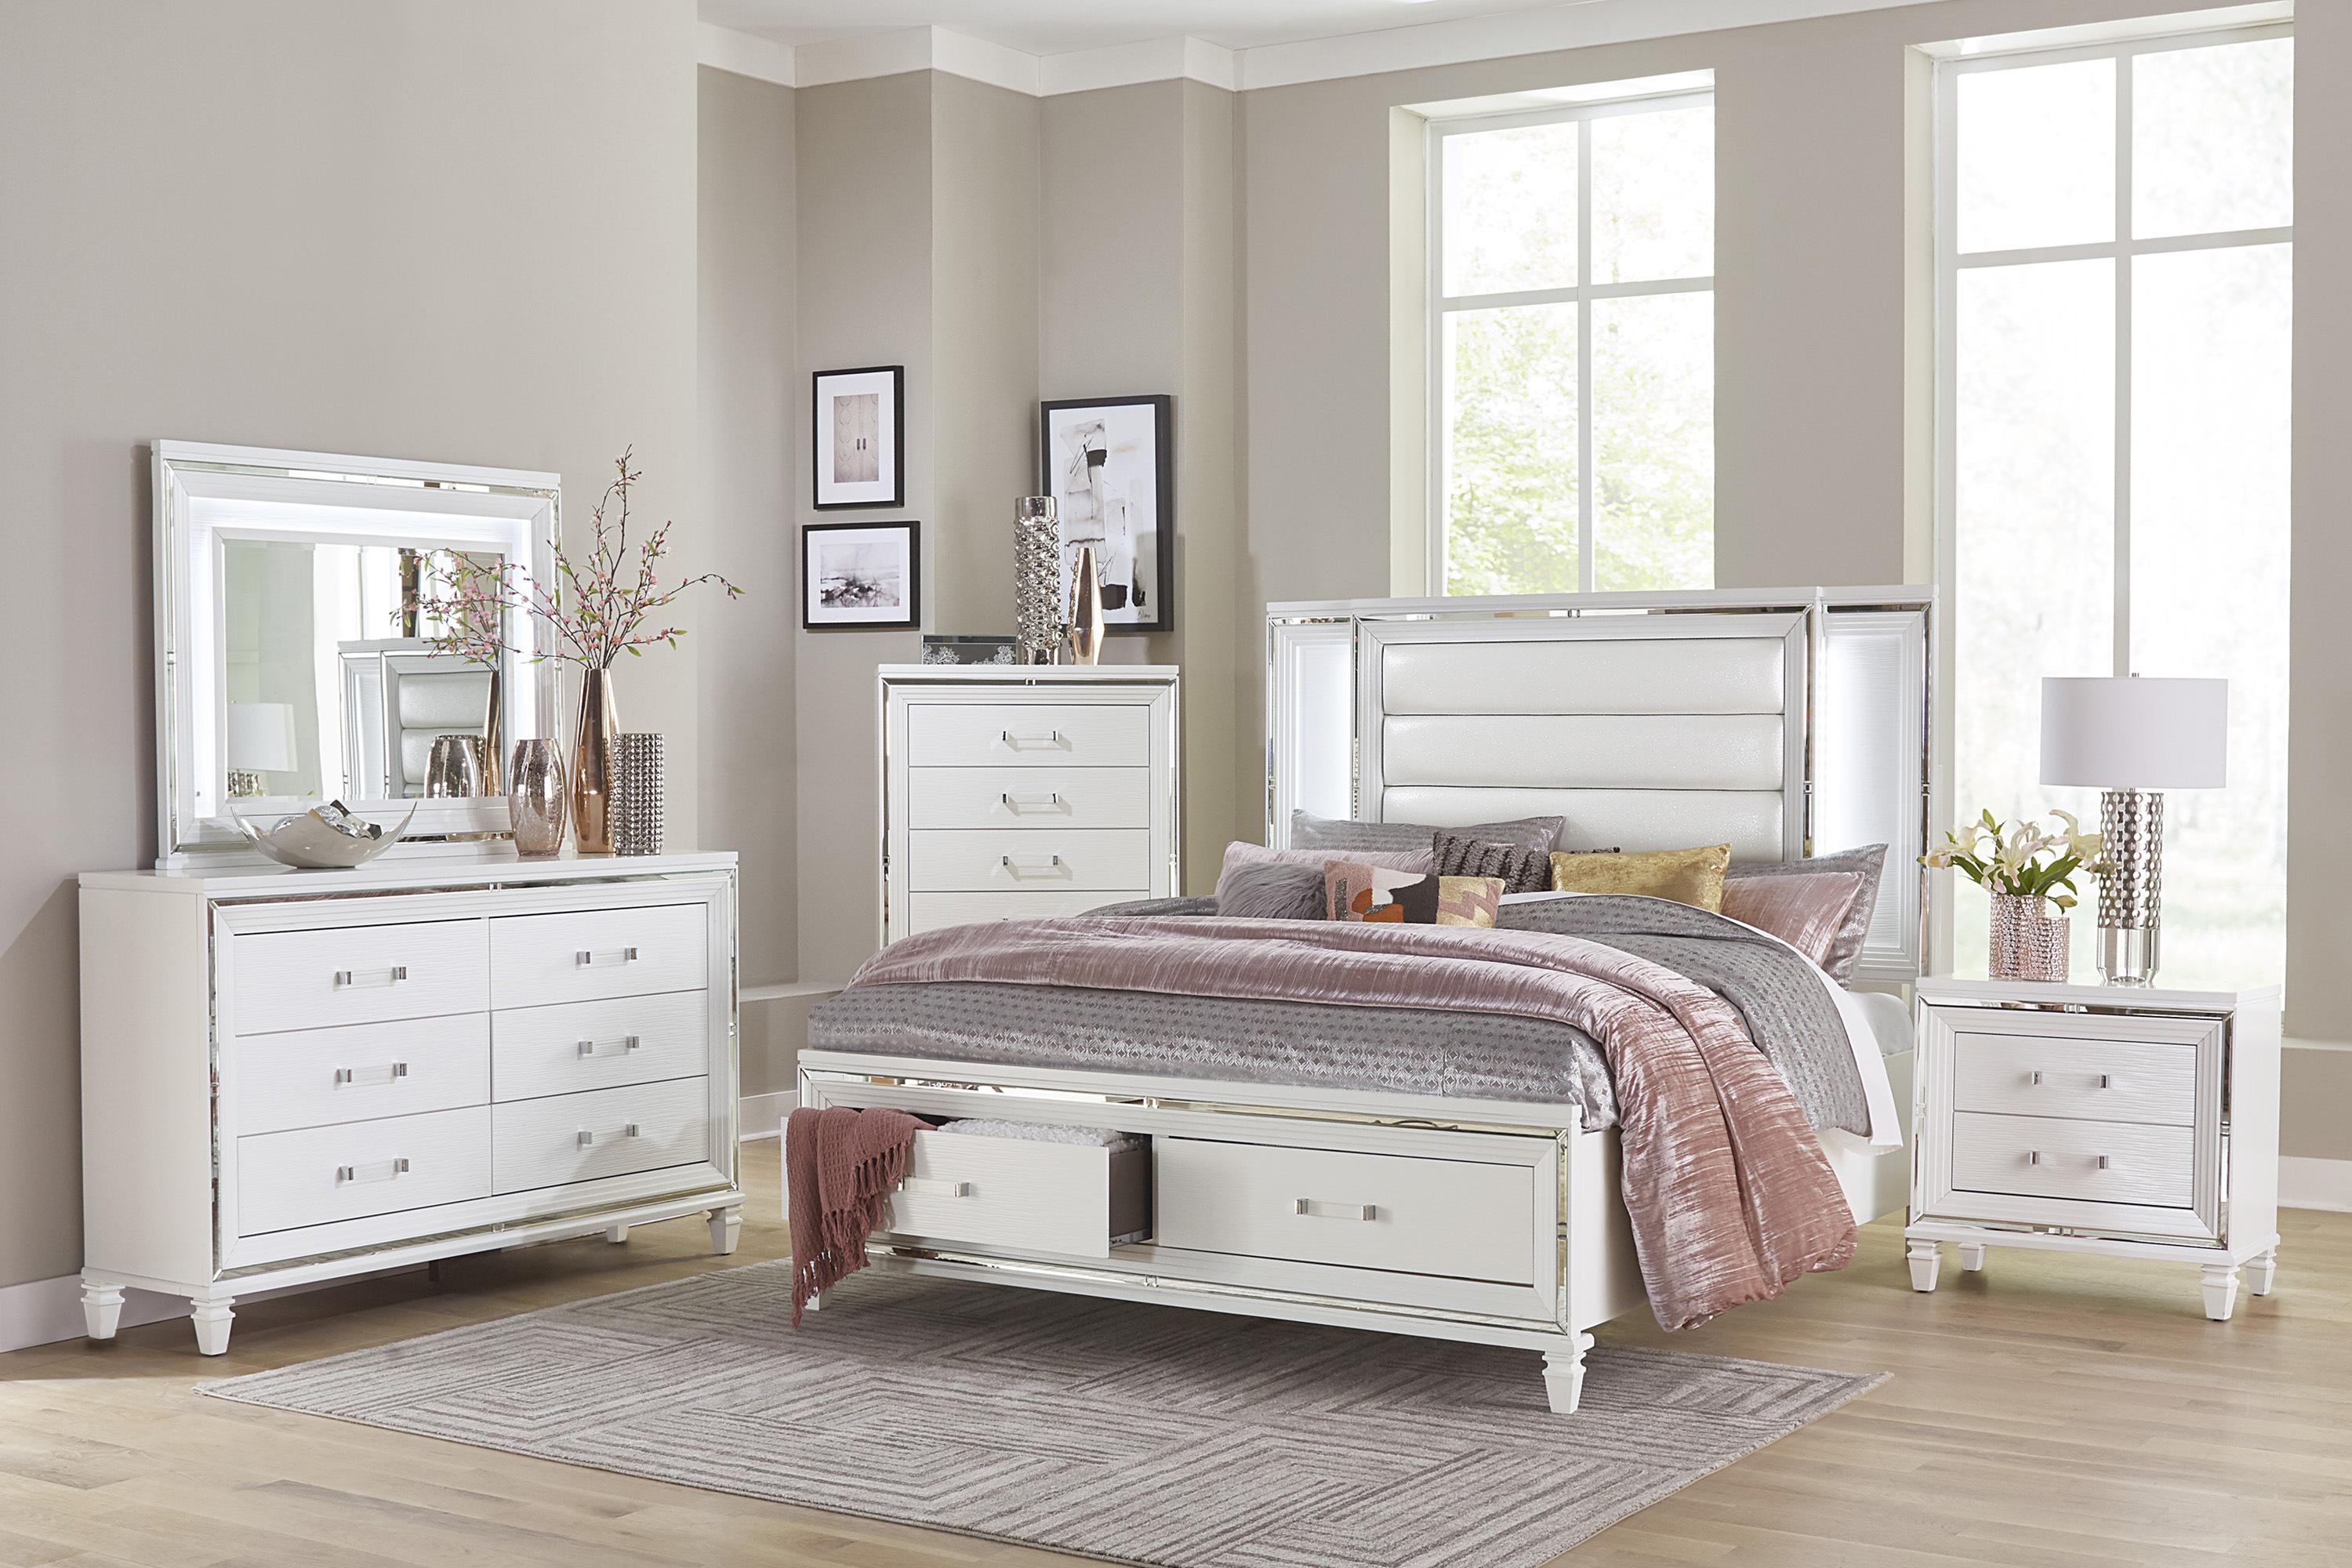 Modern Bedroom Set 1616WK-1CK-5PC Tamsin 1616WK-1CK-5PC in White Faux Leather